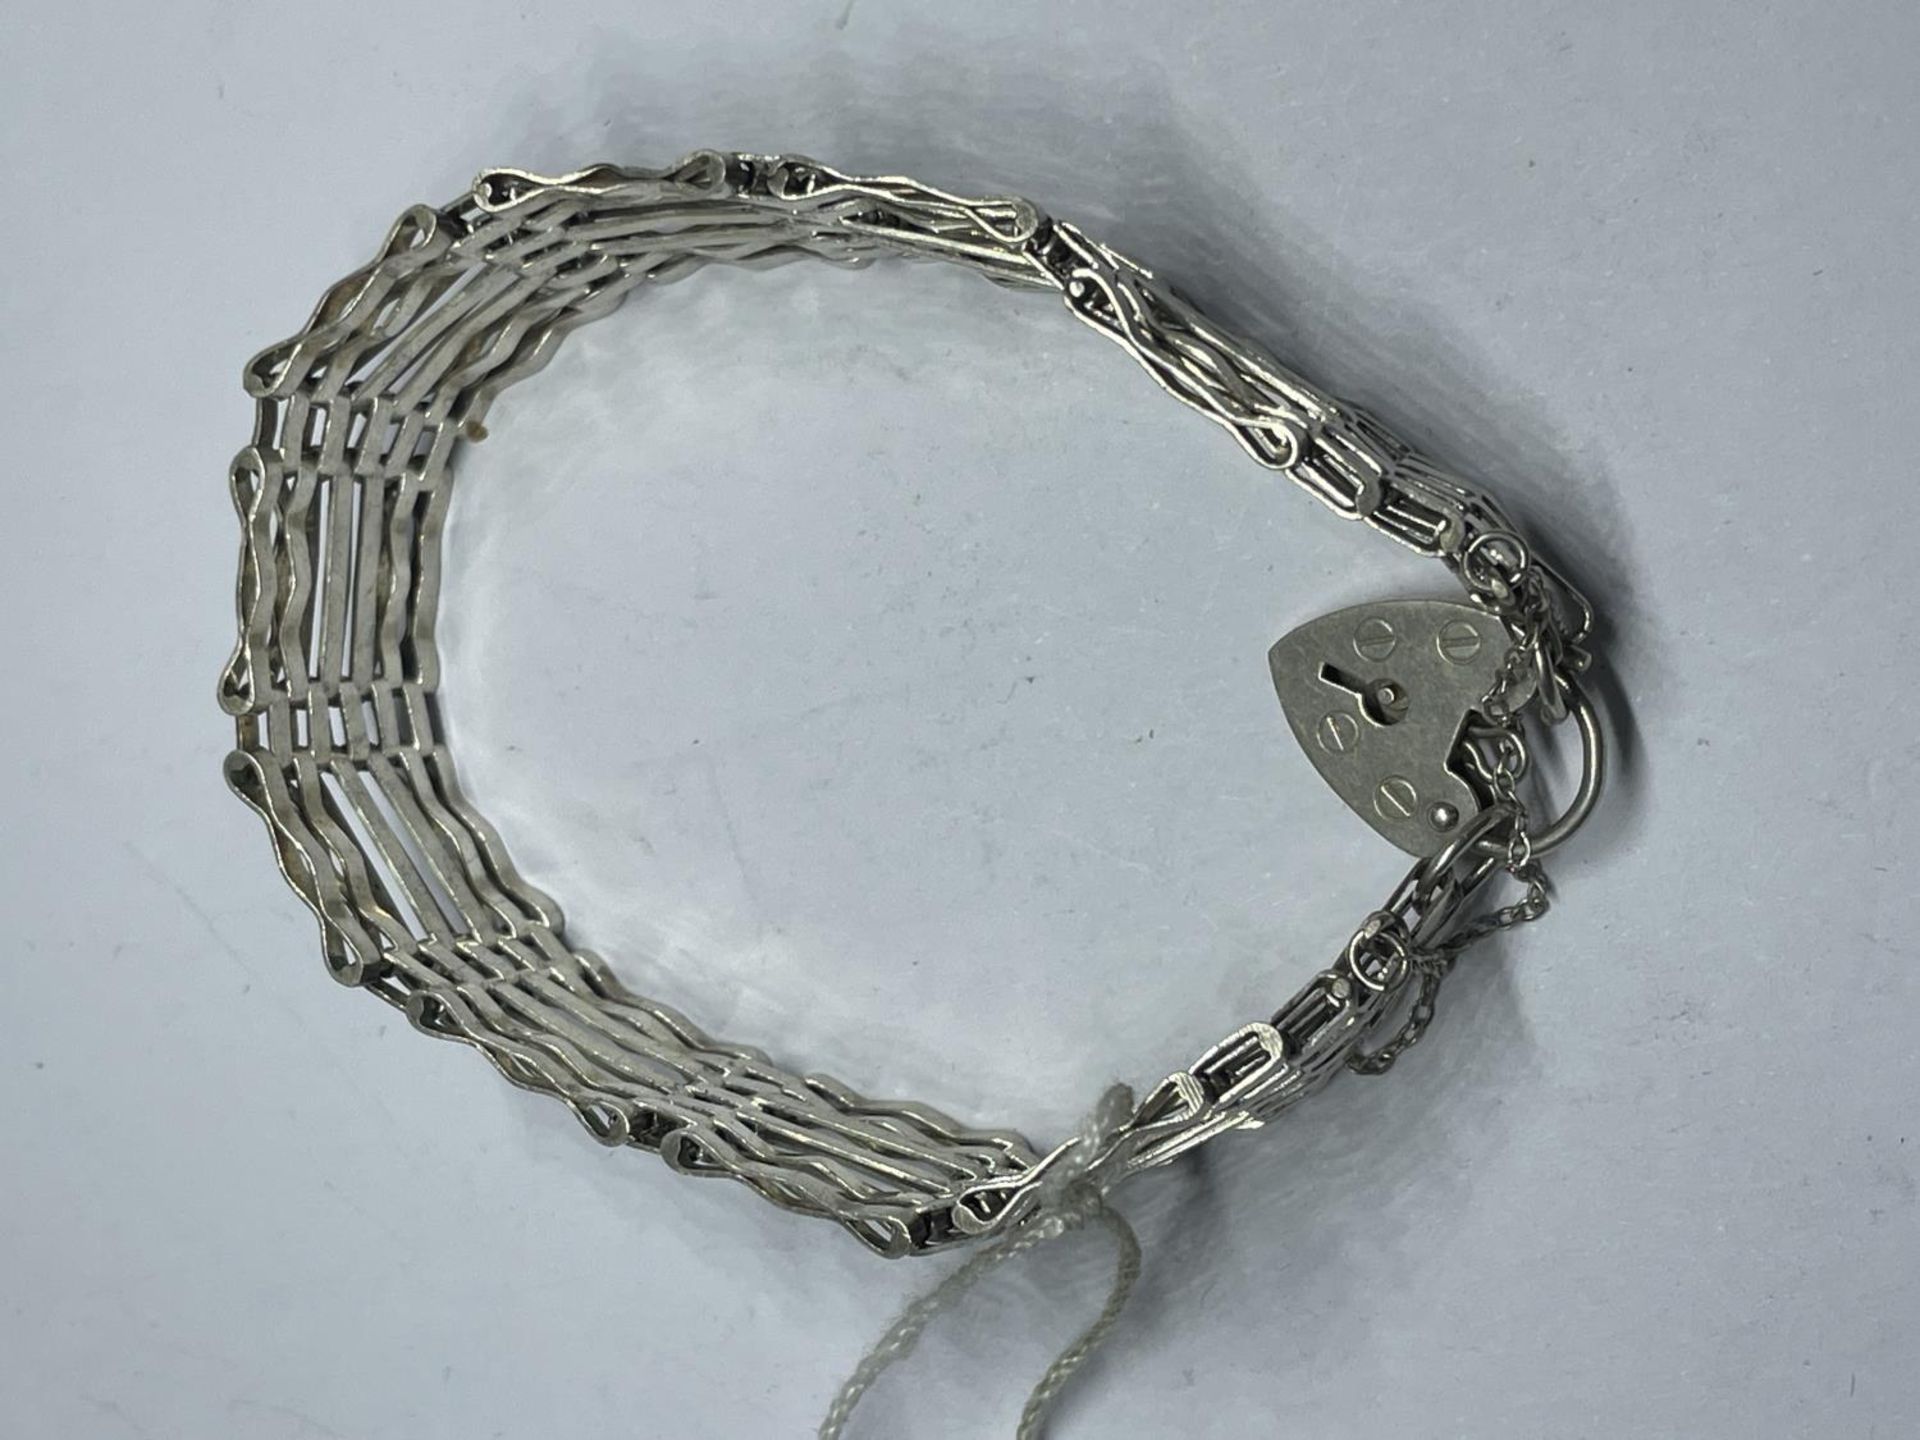 A MARKED SILVER SIX BAR GATE BRACELET WITH HEART PADLOCK WEIGHT 20 GRAMS